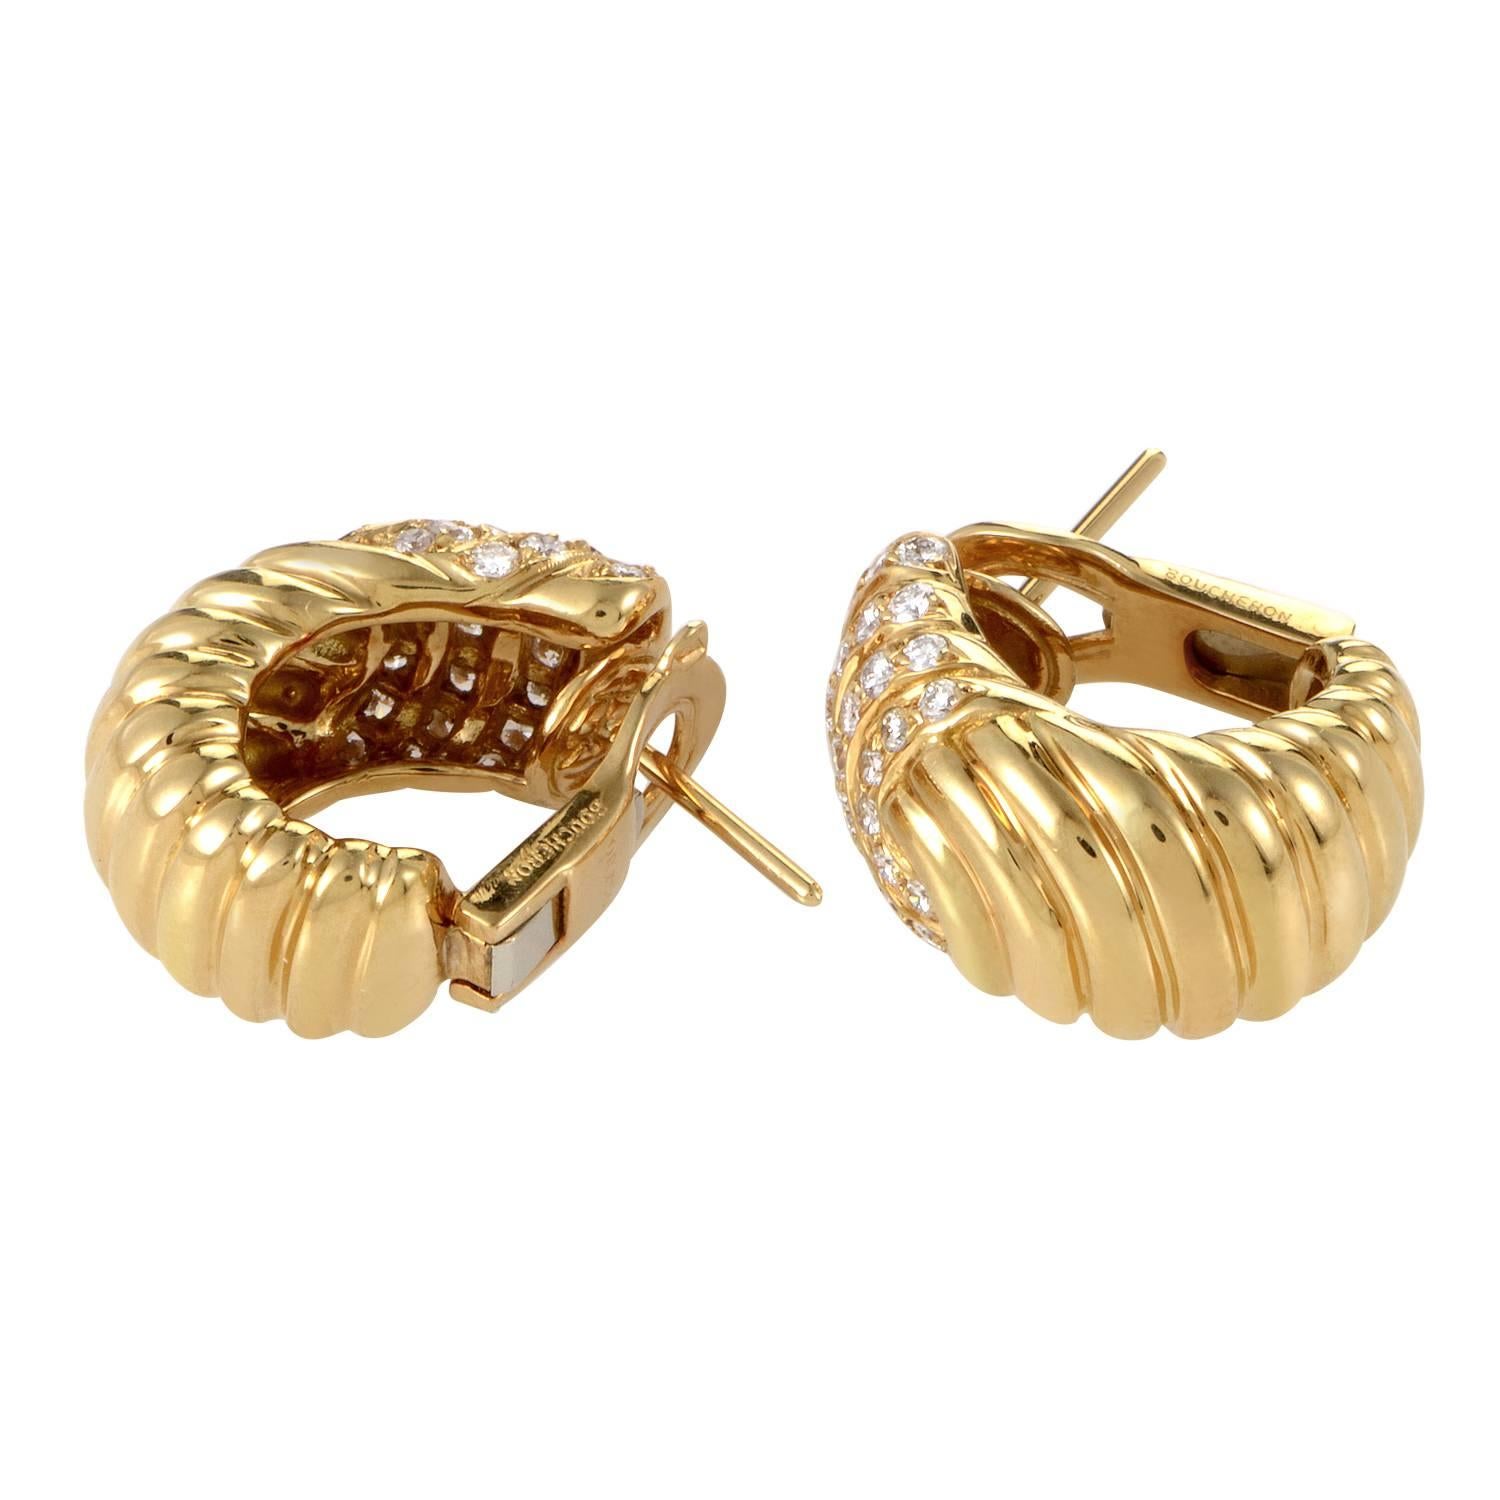 18K yellow gold is expertly forged into fluid ripples. Churning within these precious pools are streams of 1.60ct diamonds. These magnificent and unique Boucheron earrings come with their own box from the manufacturer.